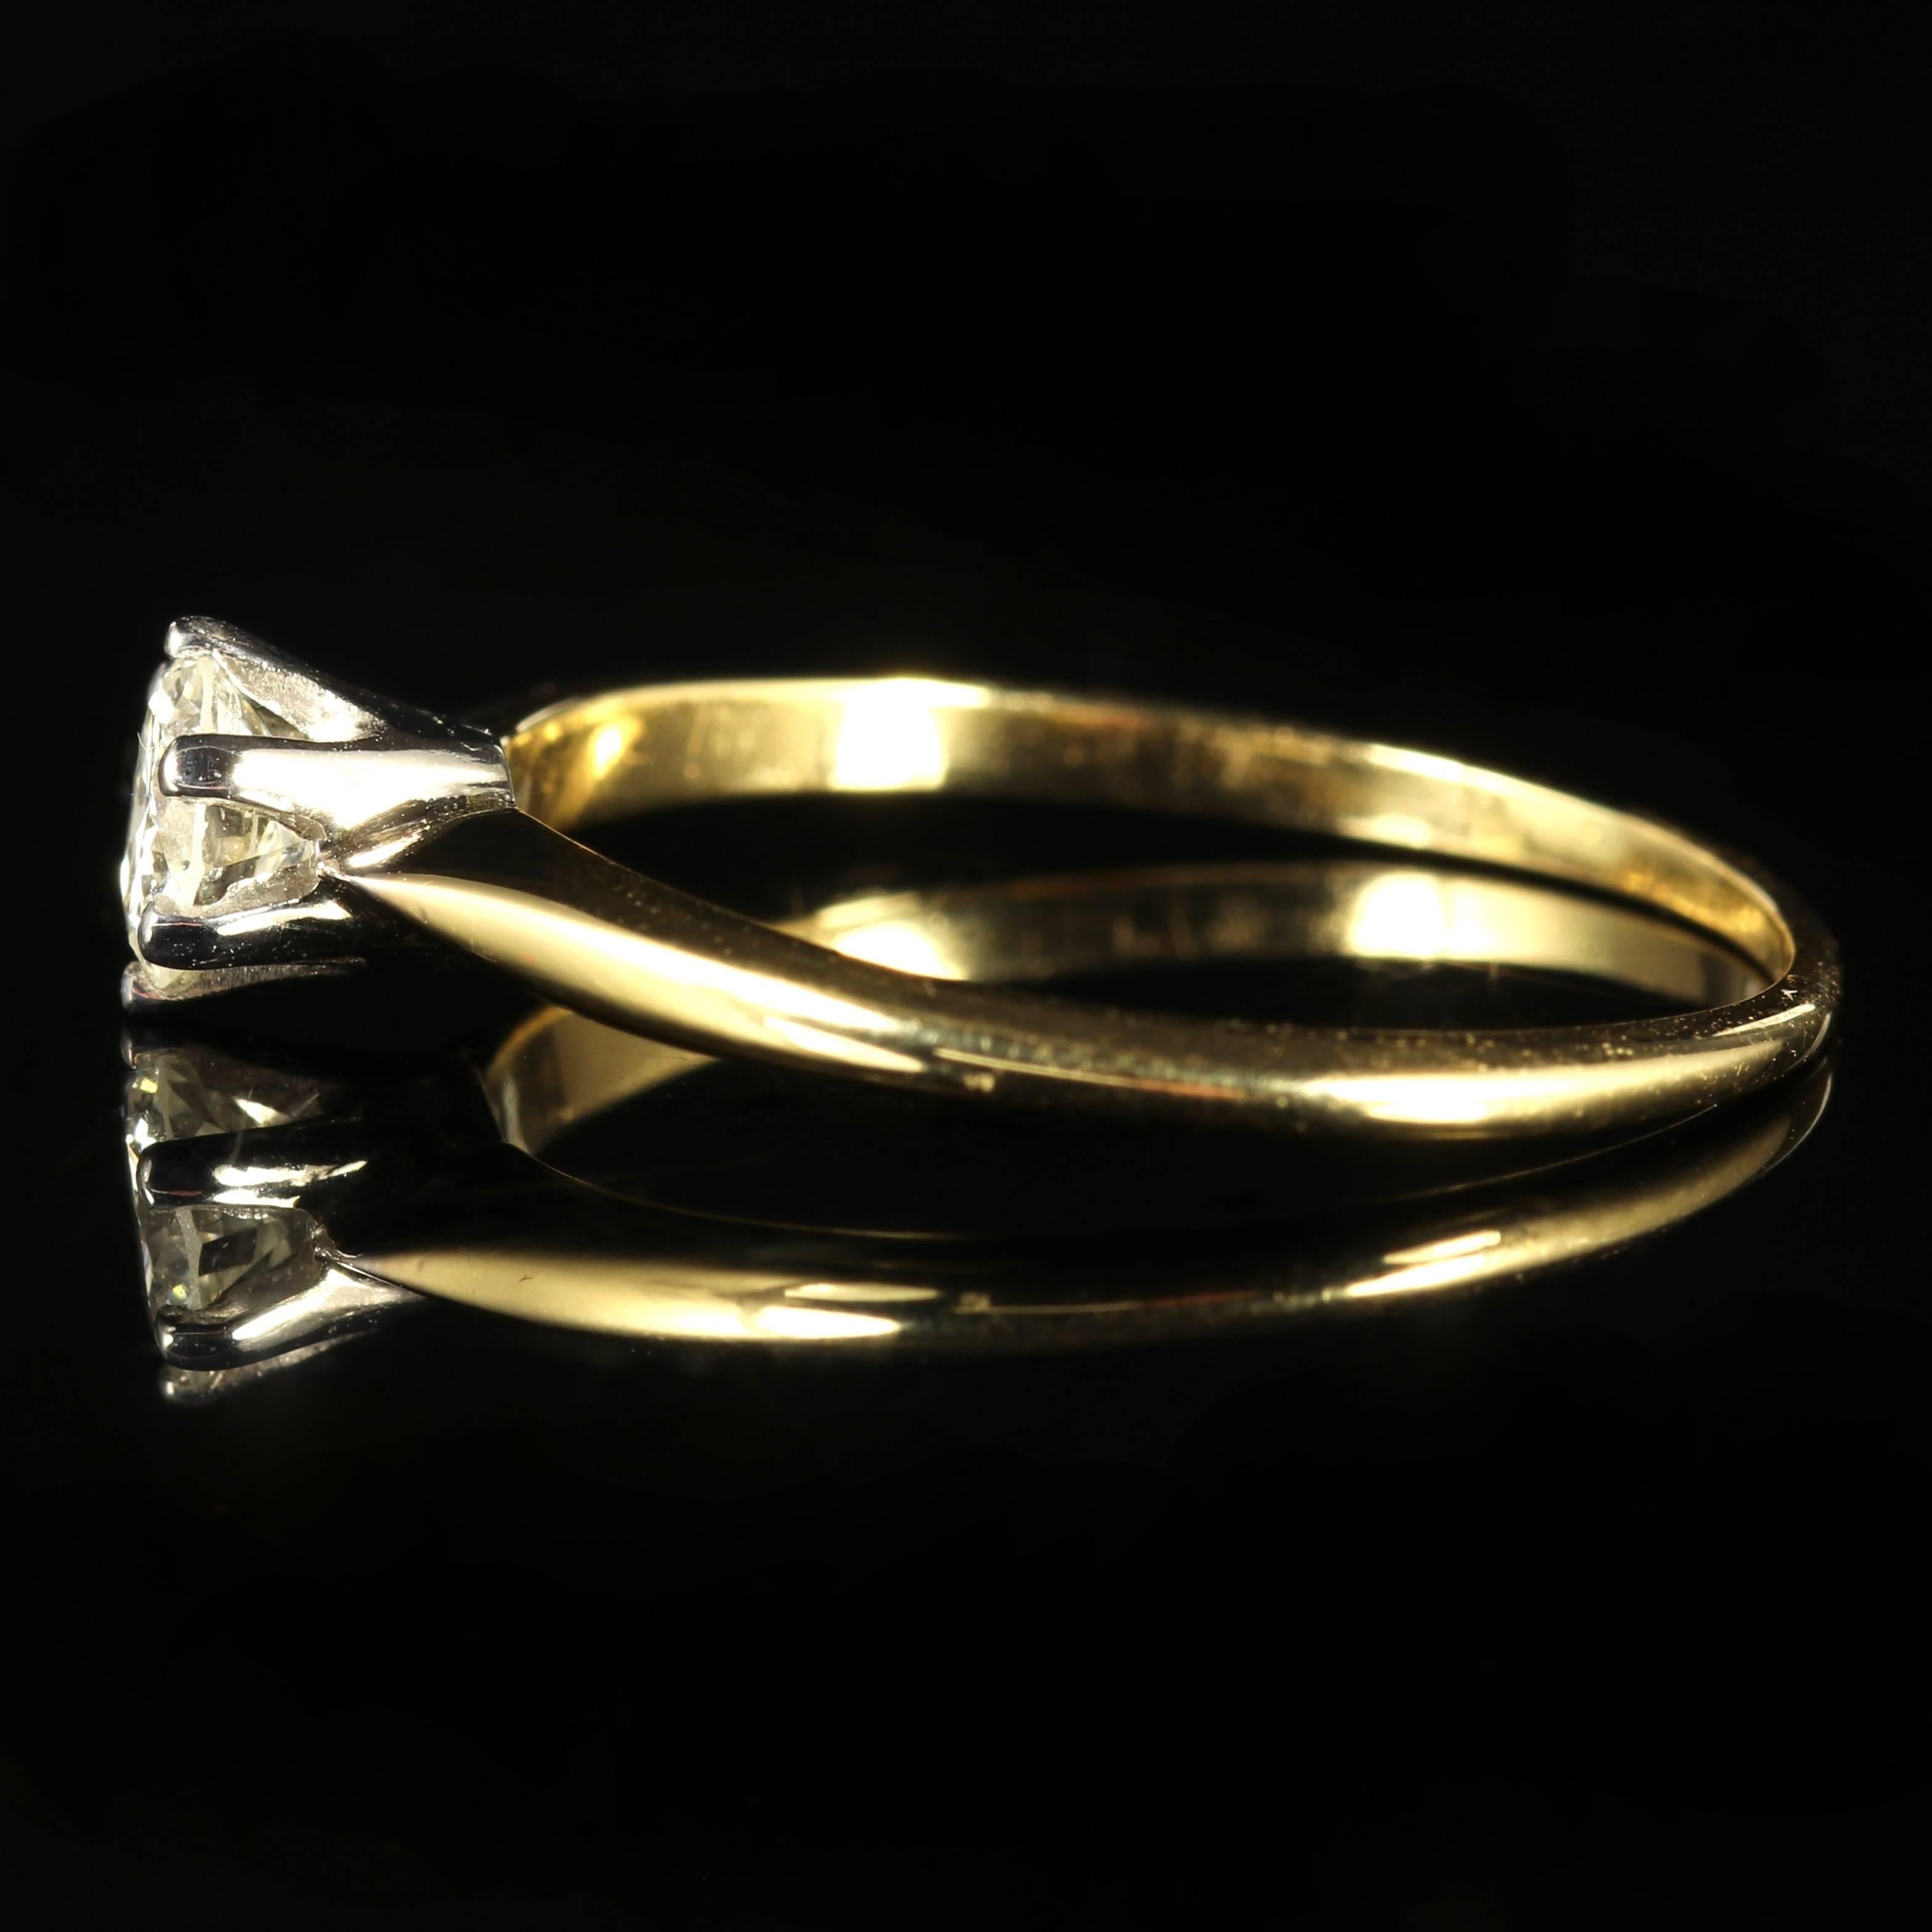 Antique Victorian Diamond Solitaire Engagement Ring 18 Carat Yellow Gold 1